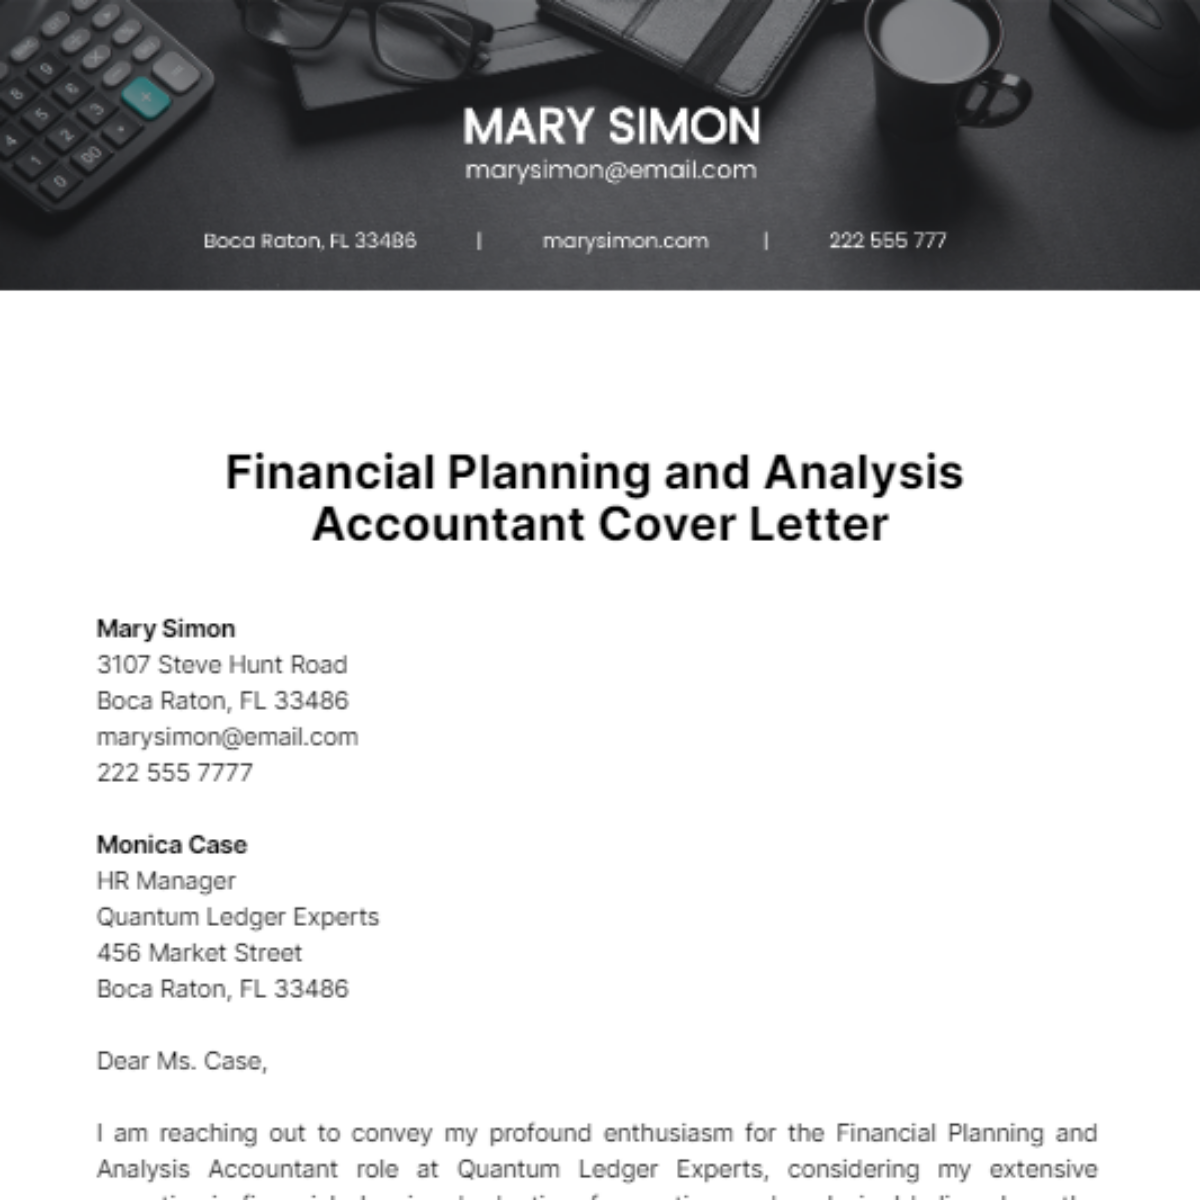 Financial Planning and Analysis Accountant Cover Letter Template